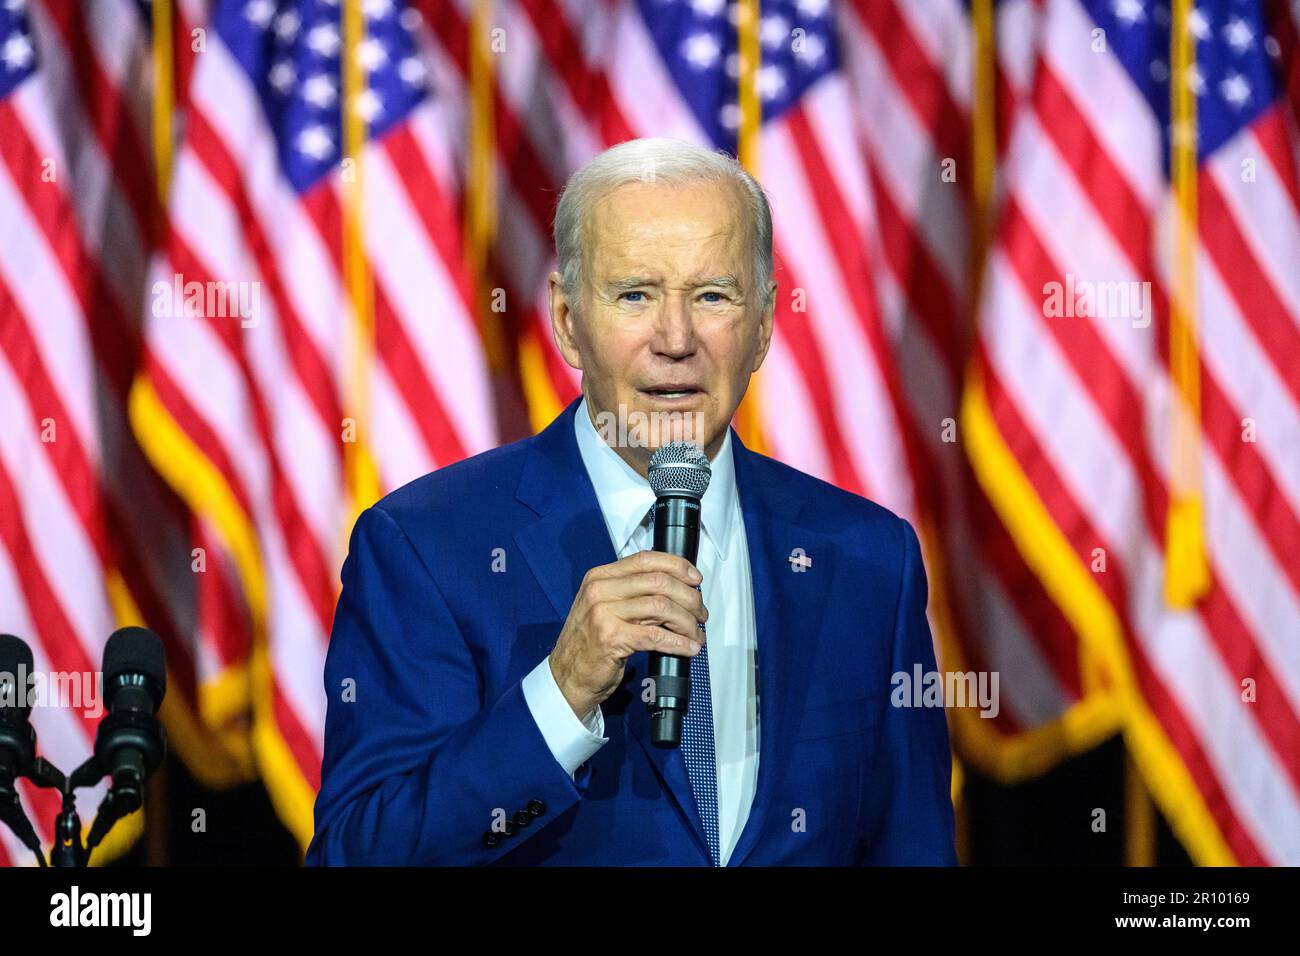 Valhalla, New York, USA. 10th May, 2023. U.S. President Joe Biden delivers remarks at the SUNY Westchester Community College in the outskirts of New York city. In a speech titled "Investing in America", Biden discussed why Congress must avoid default immediately. Credit: Enrique Shore/Alamy Live News Stock Photo